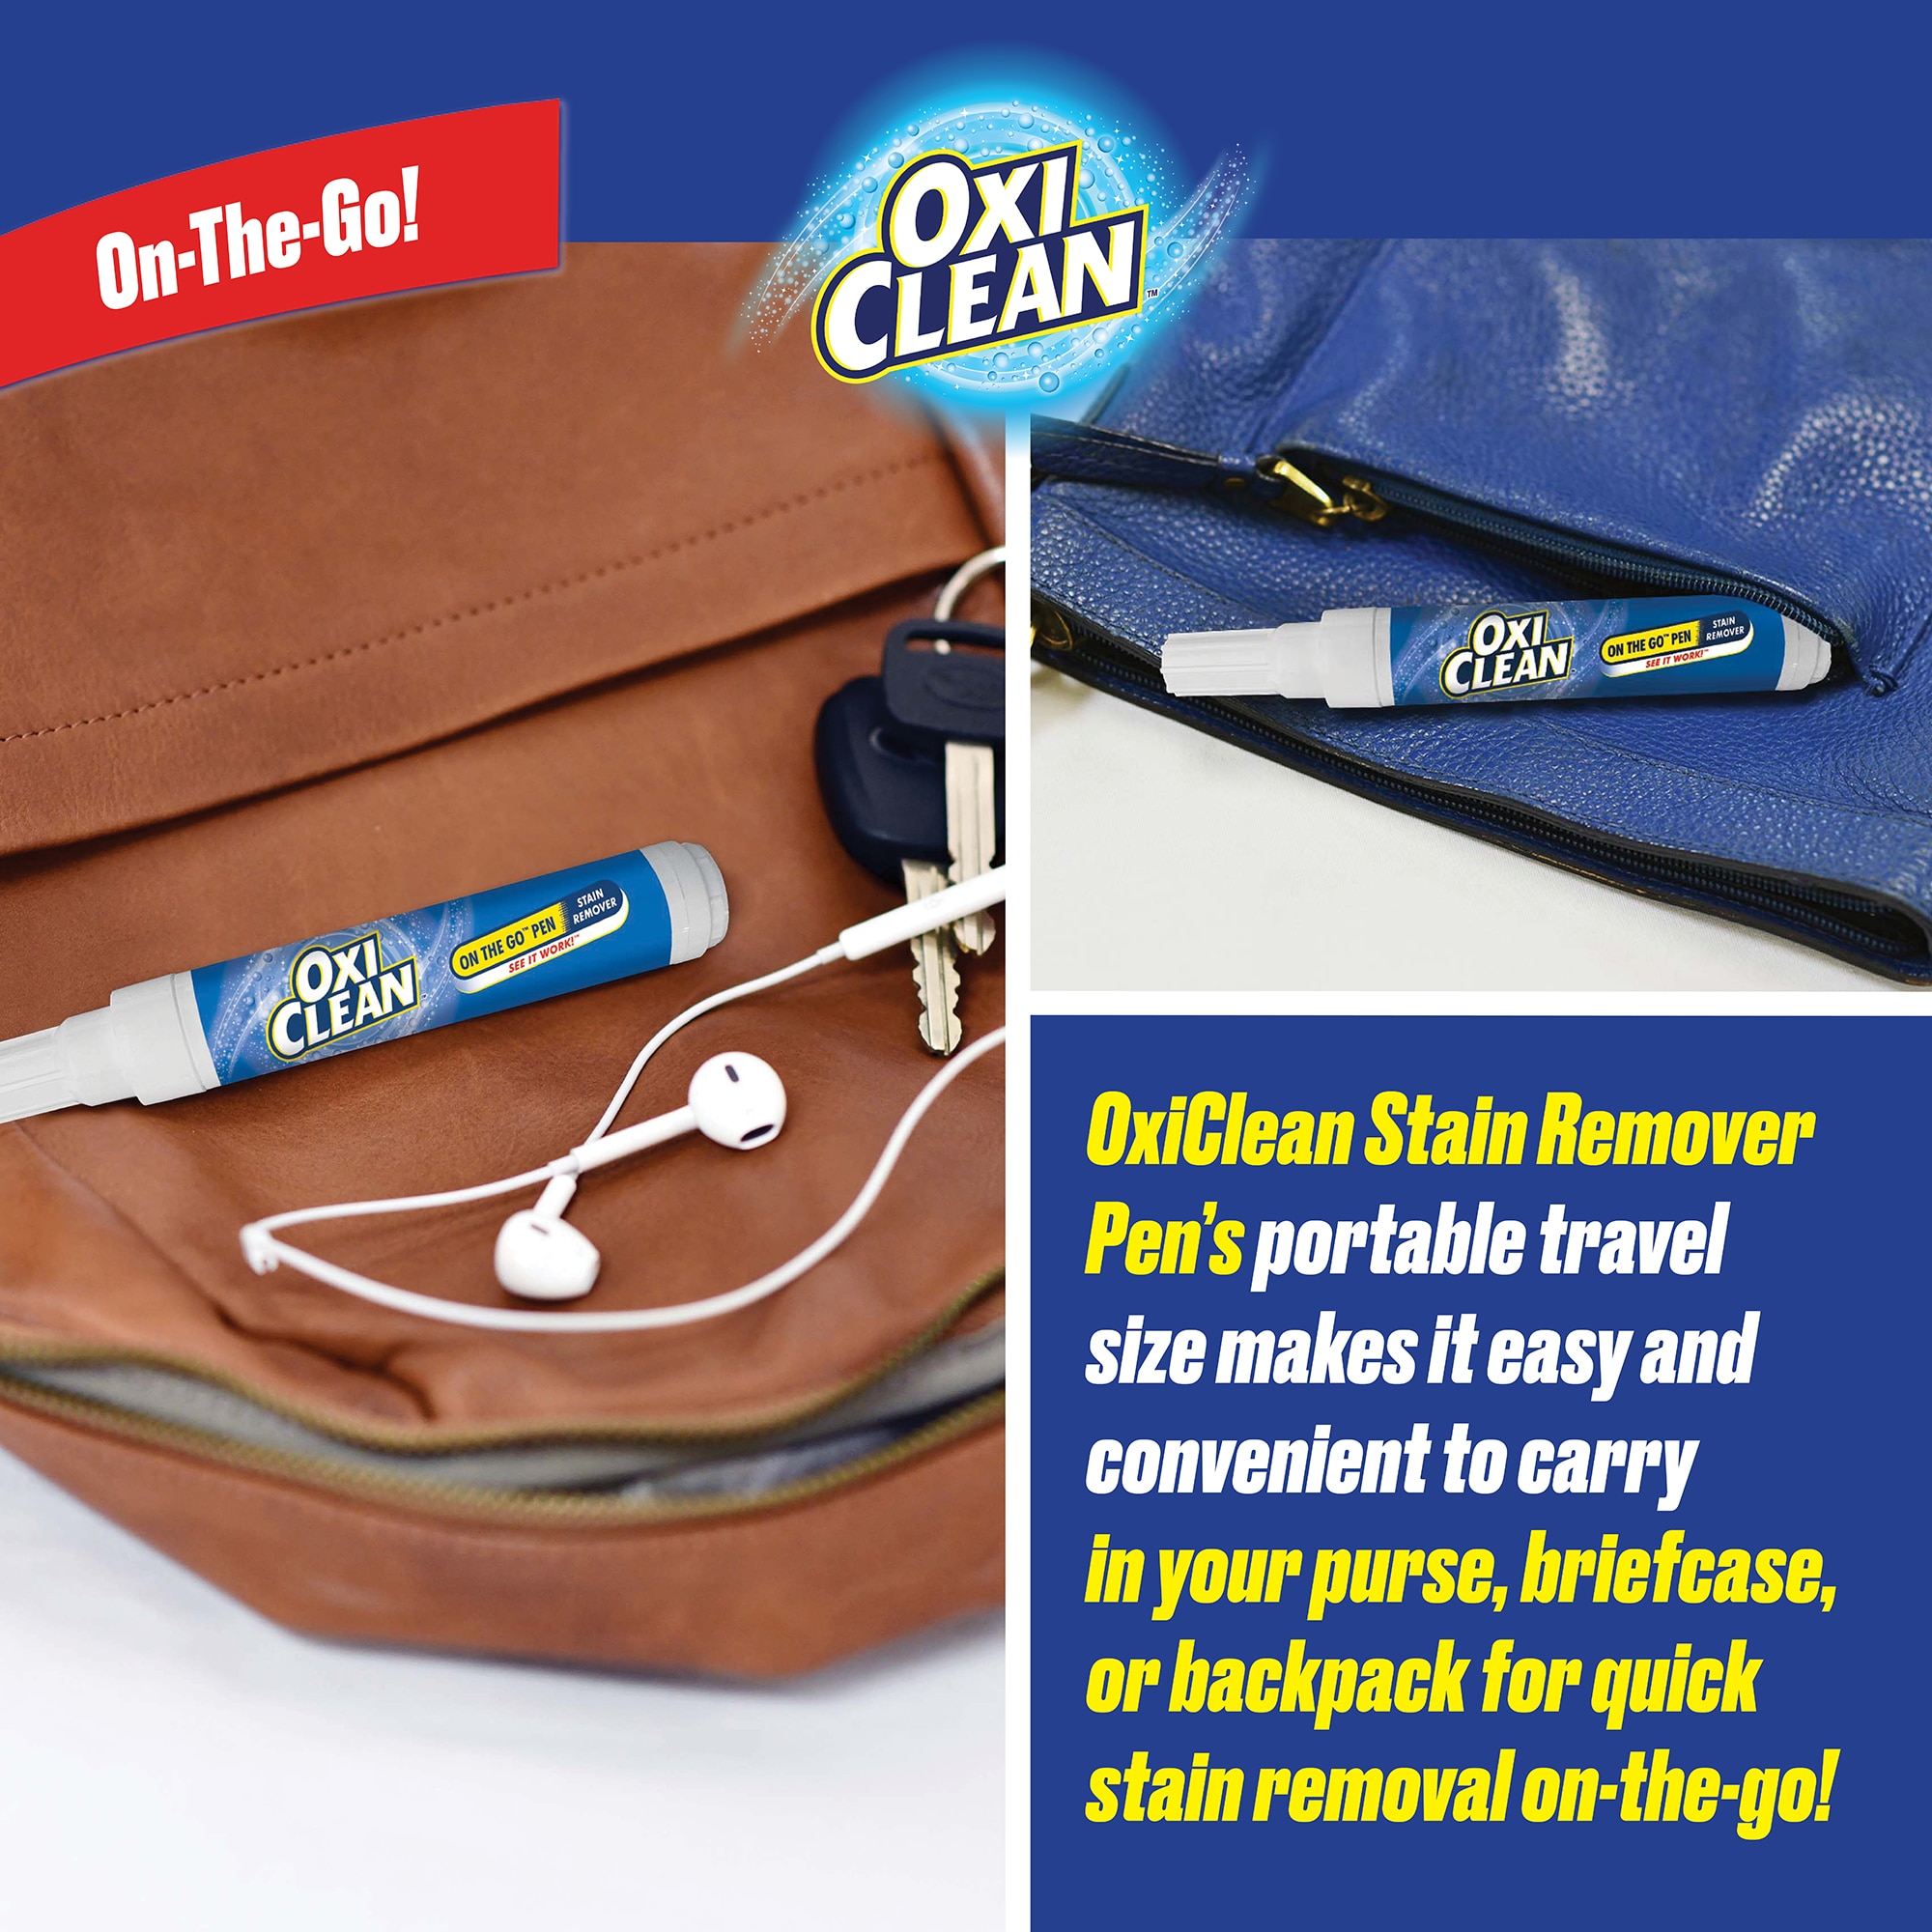  GuruNanda OxiClean Stain Remover Pen for Clothes (3 Pack) -  Instant Spot Cleaning for All Laundry Stains: Blood, Food, Drinks, Dirt,  Ink, Makeup - Bleach-FREE & Travel-Friendly (2x More Quantity) 